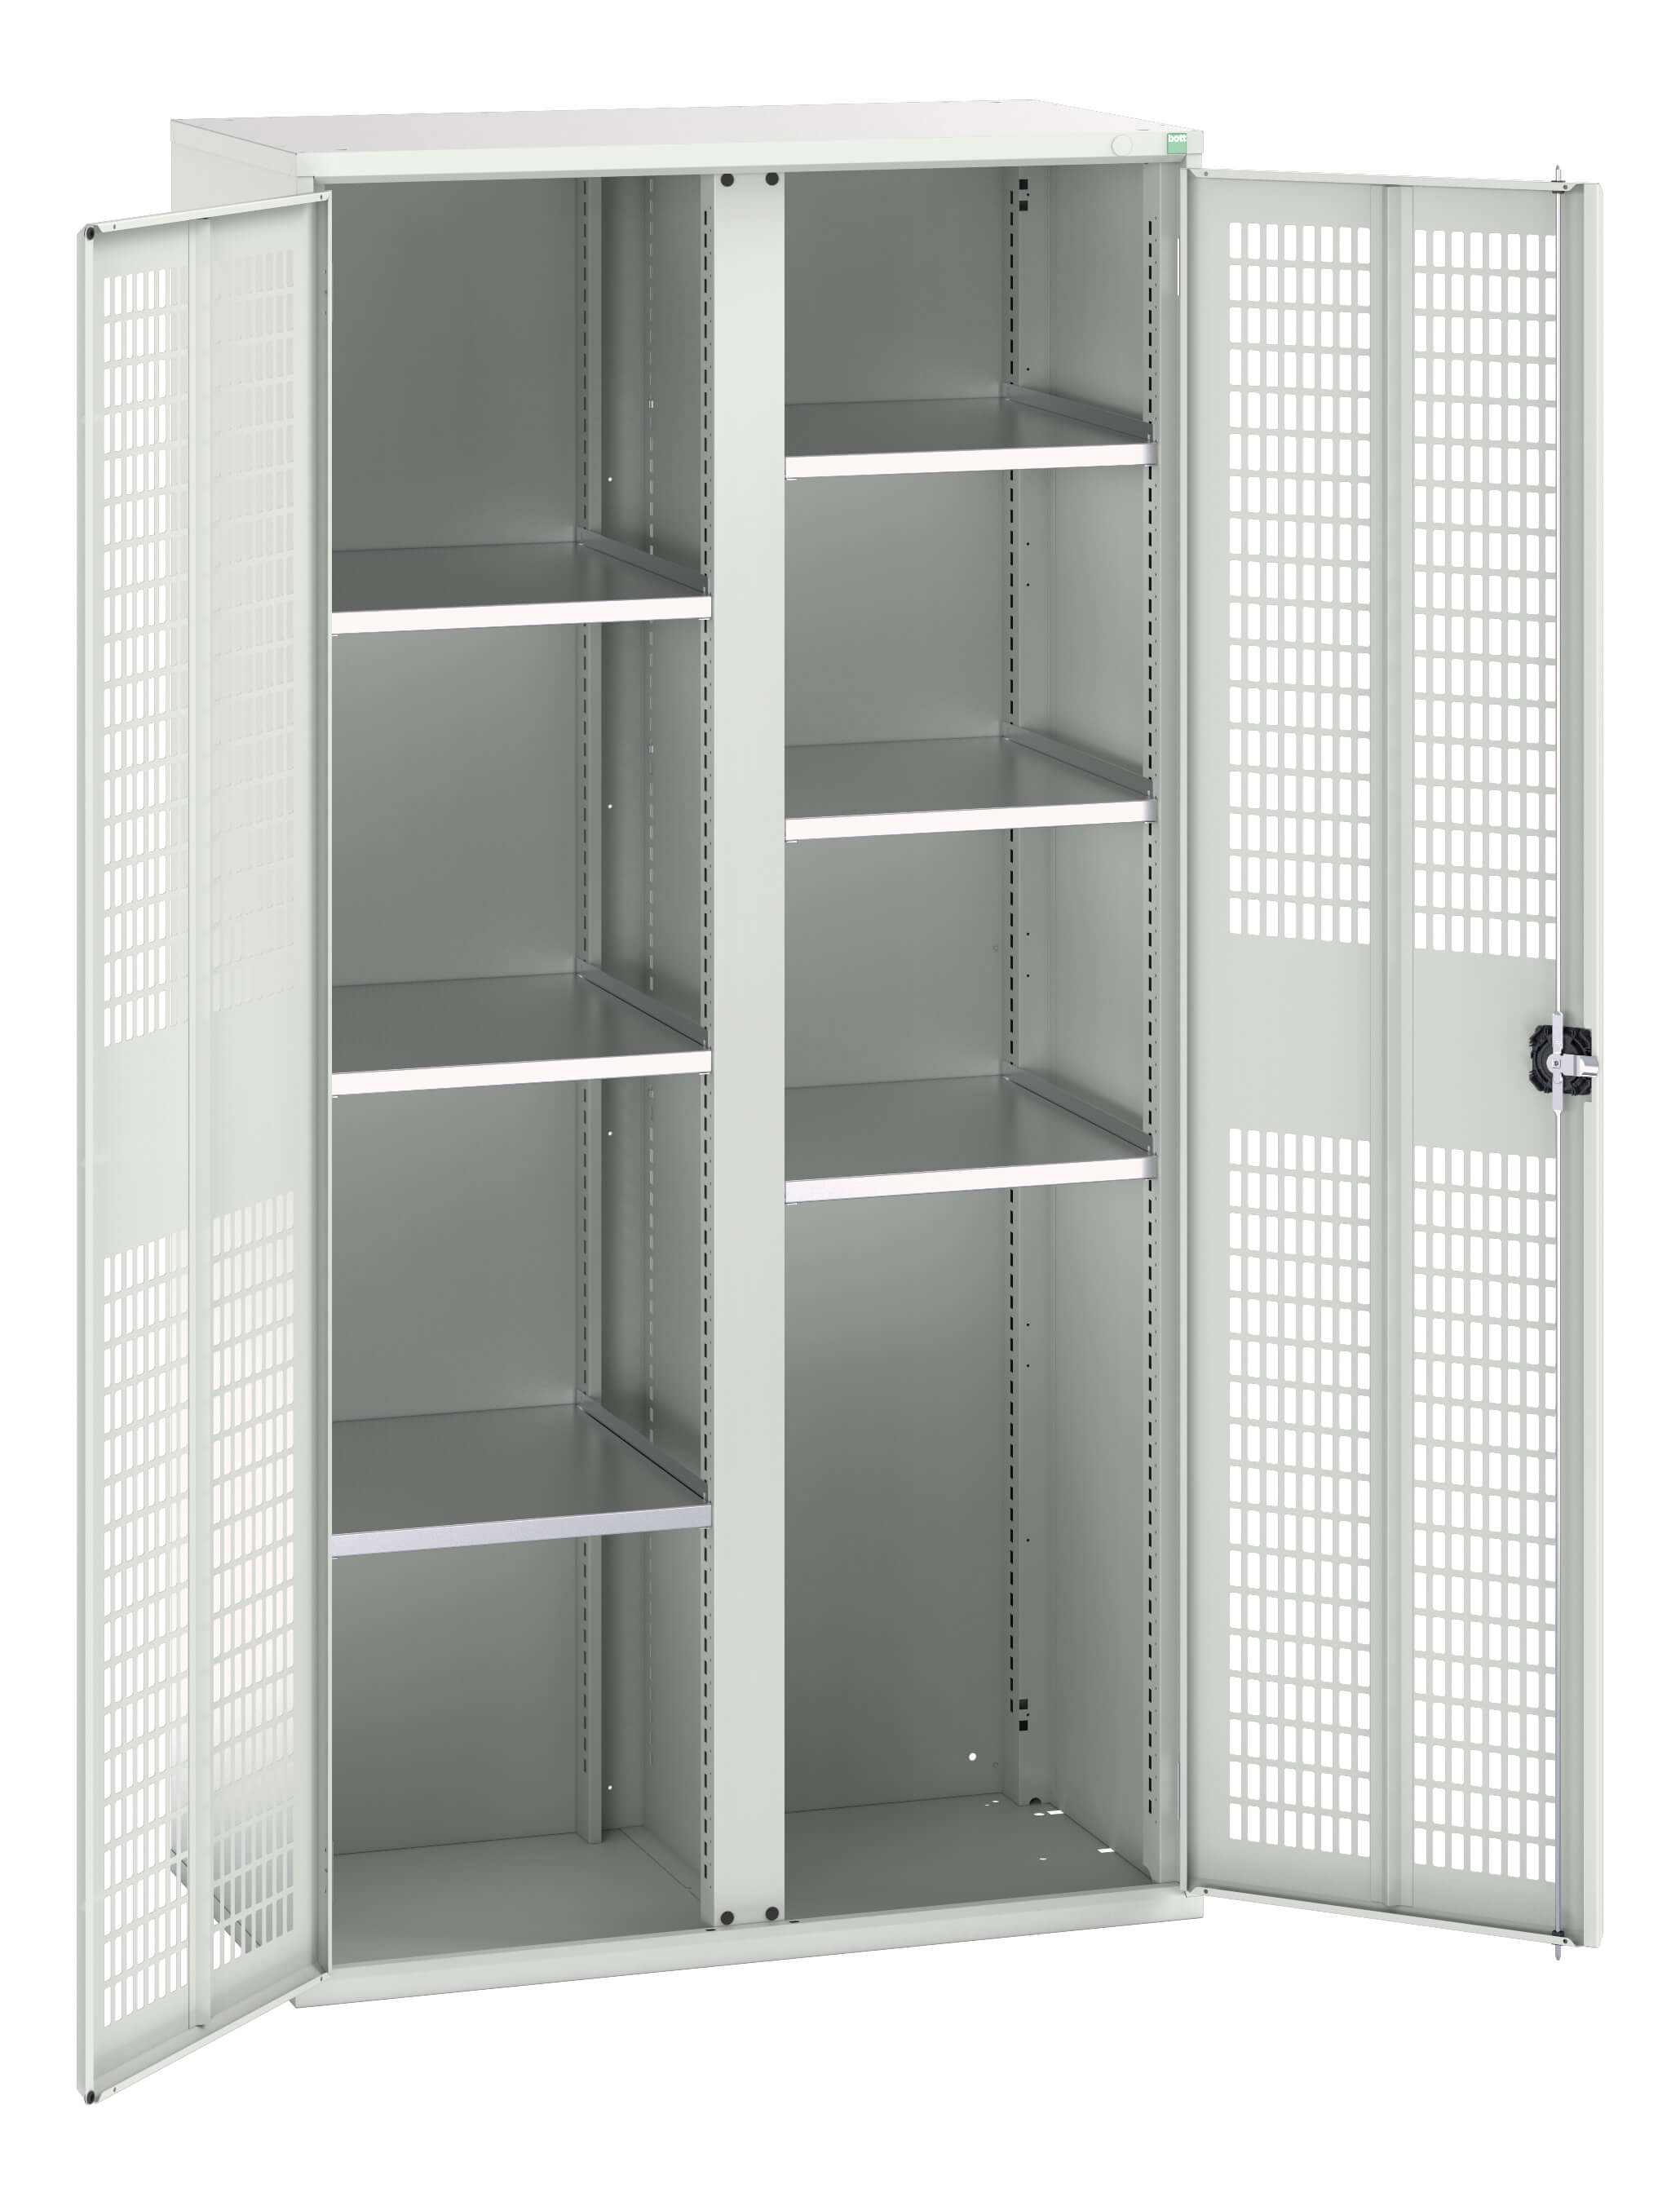 Bott Verso Ventilated Door Kitted Cupboard With Vertical Partition - 16926775.16